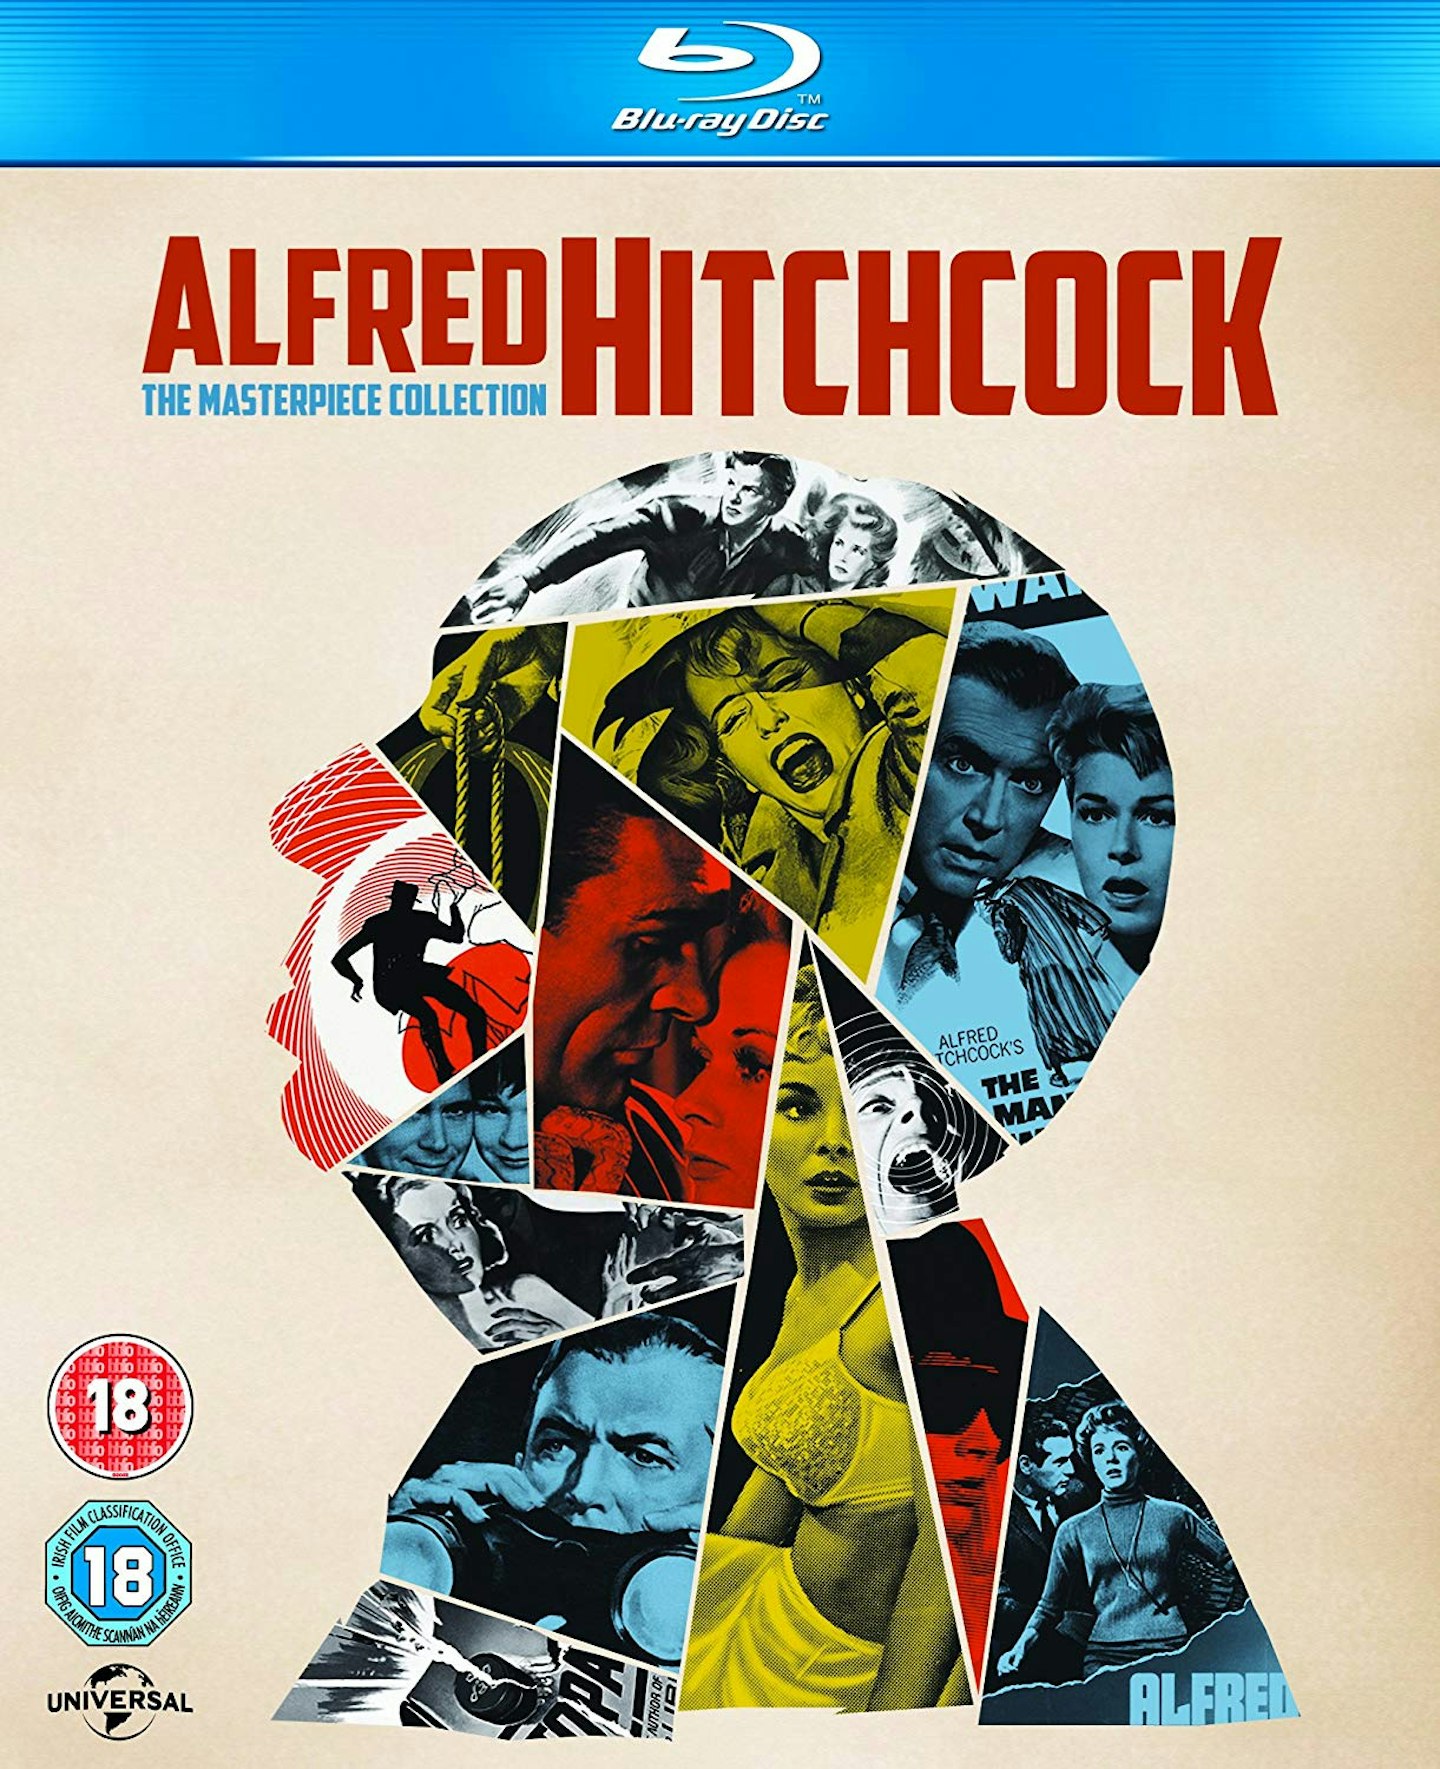 Alfred Hitchcock: The Masterpiece Collection, Blu-ray